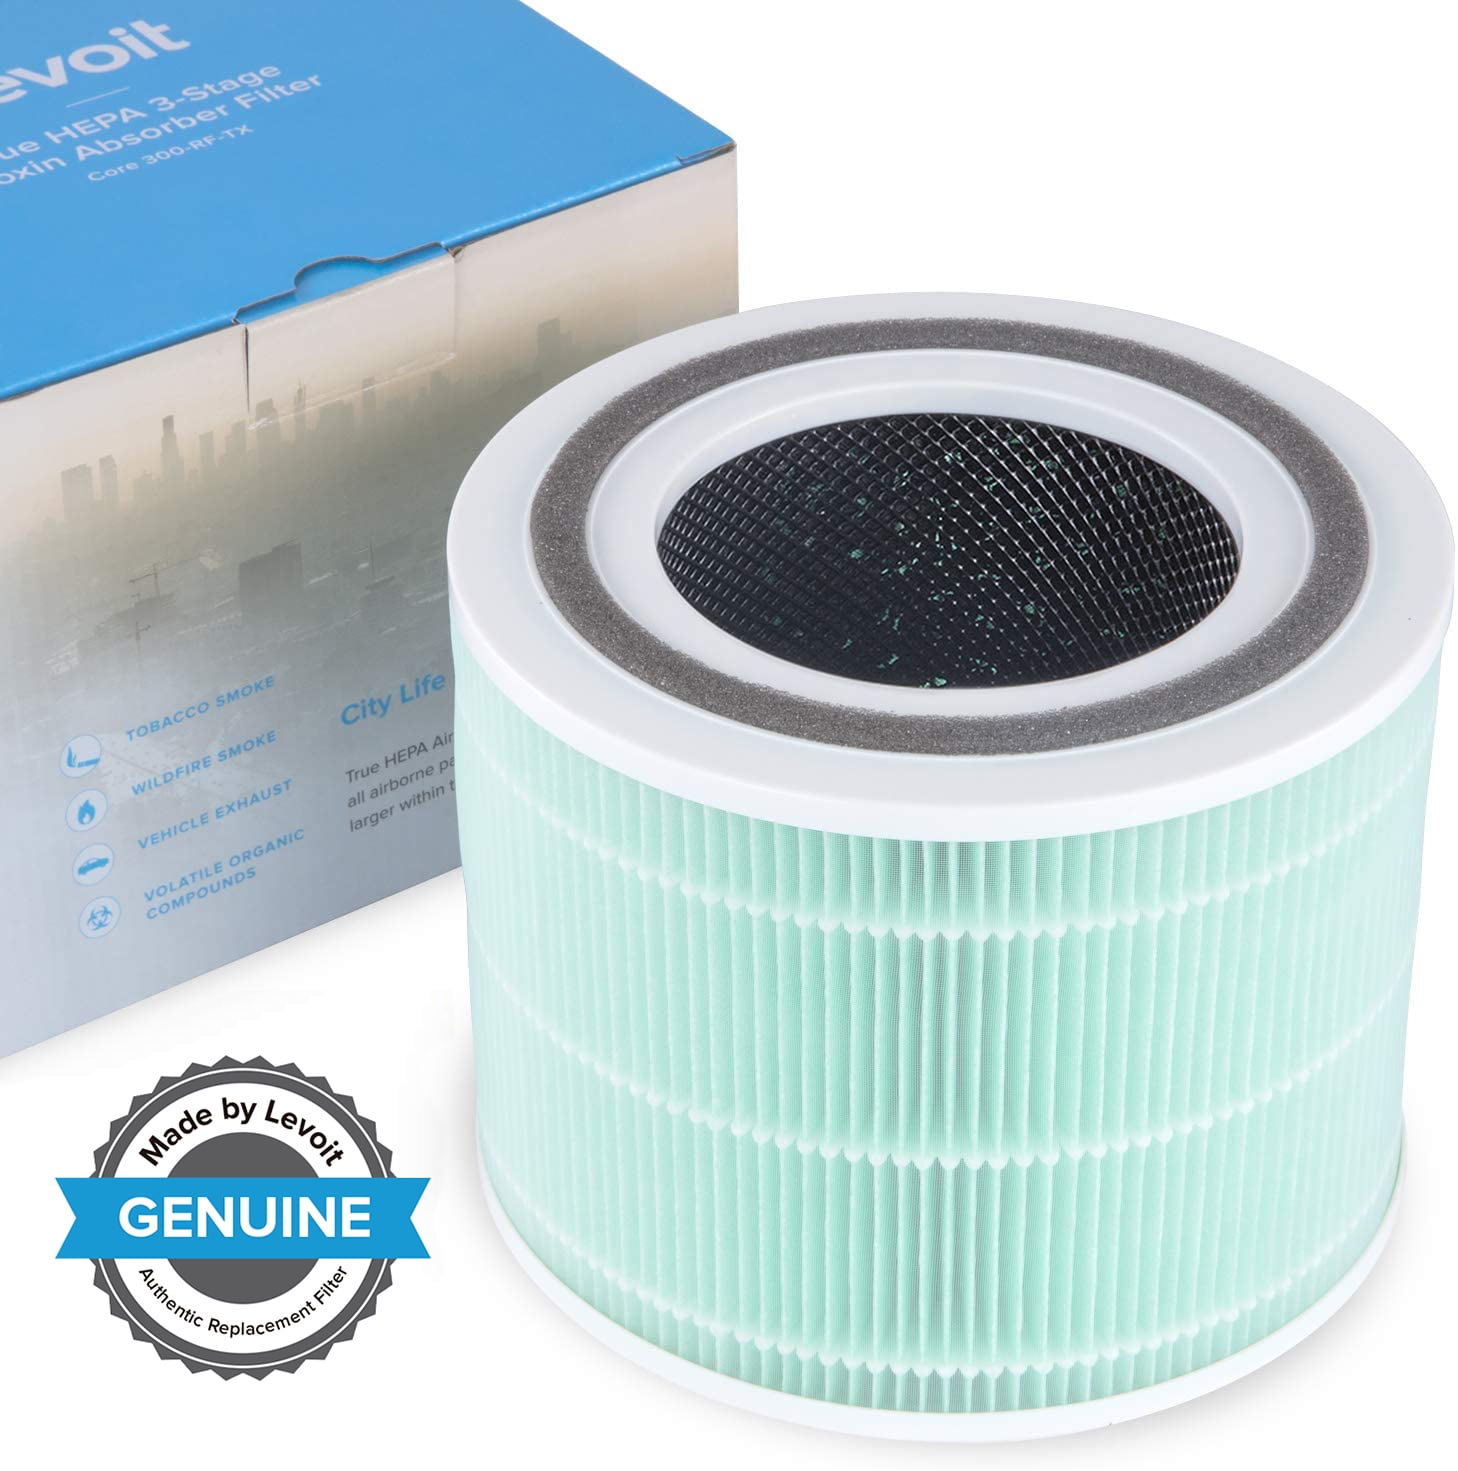 2-Pack Core 300 Toxin Absorber Replacement Filter for LEVOIT Core 300 and  Core 300S Air Purifier, Replaces Core300-RF-TX